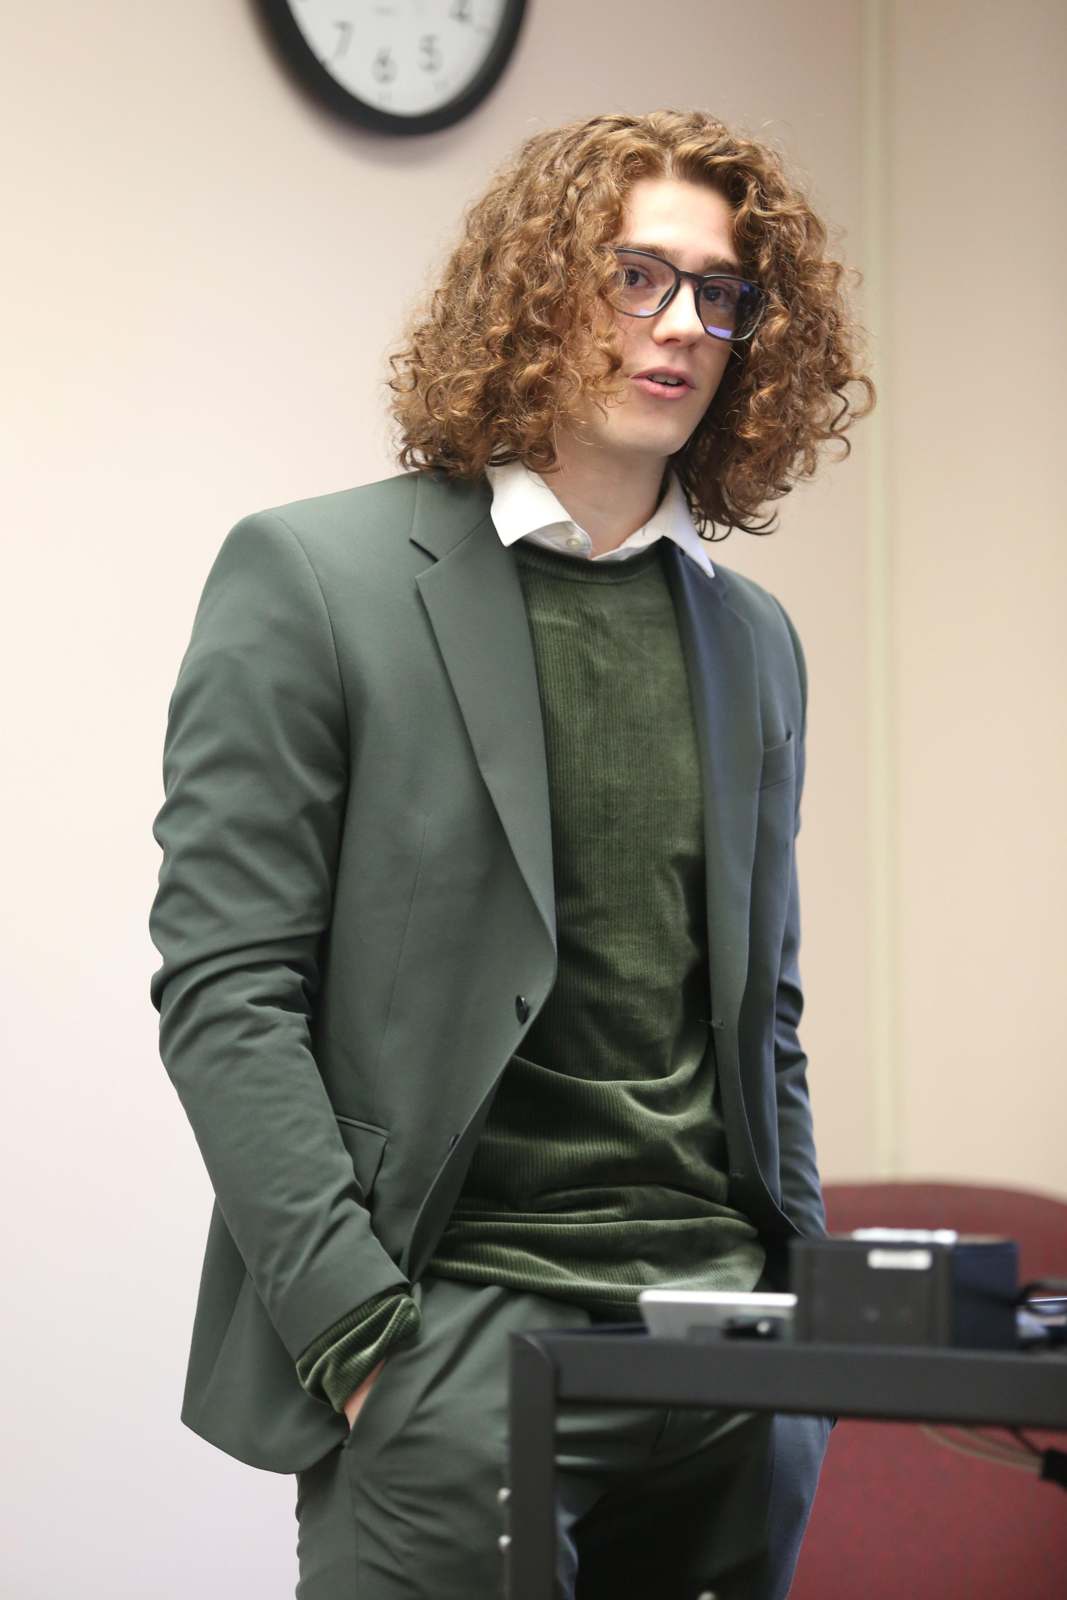 a man with curly hair wearing a suit and glasses